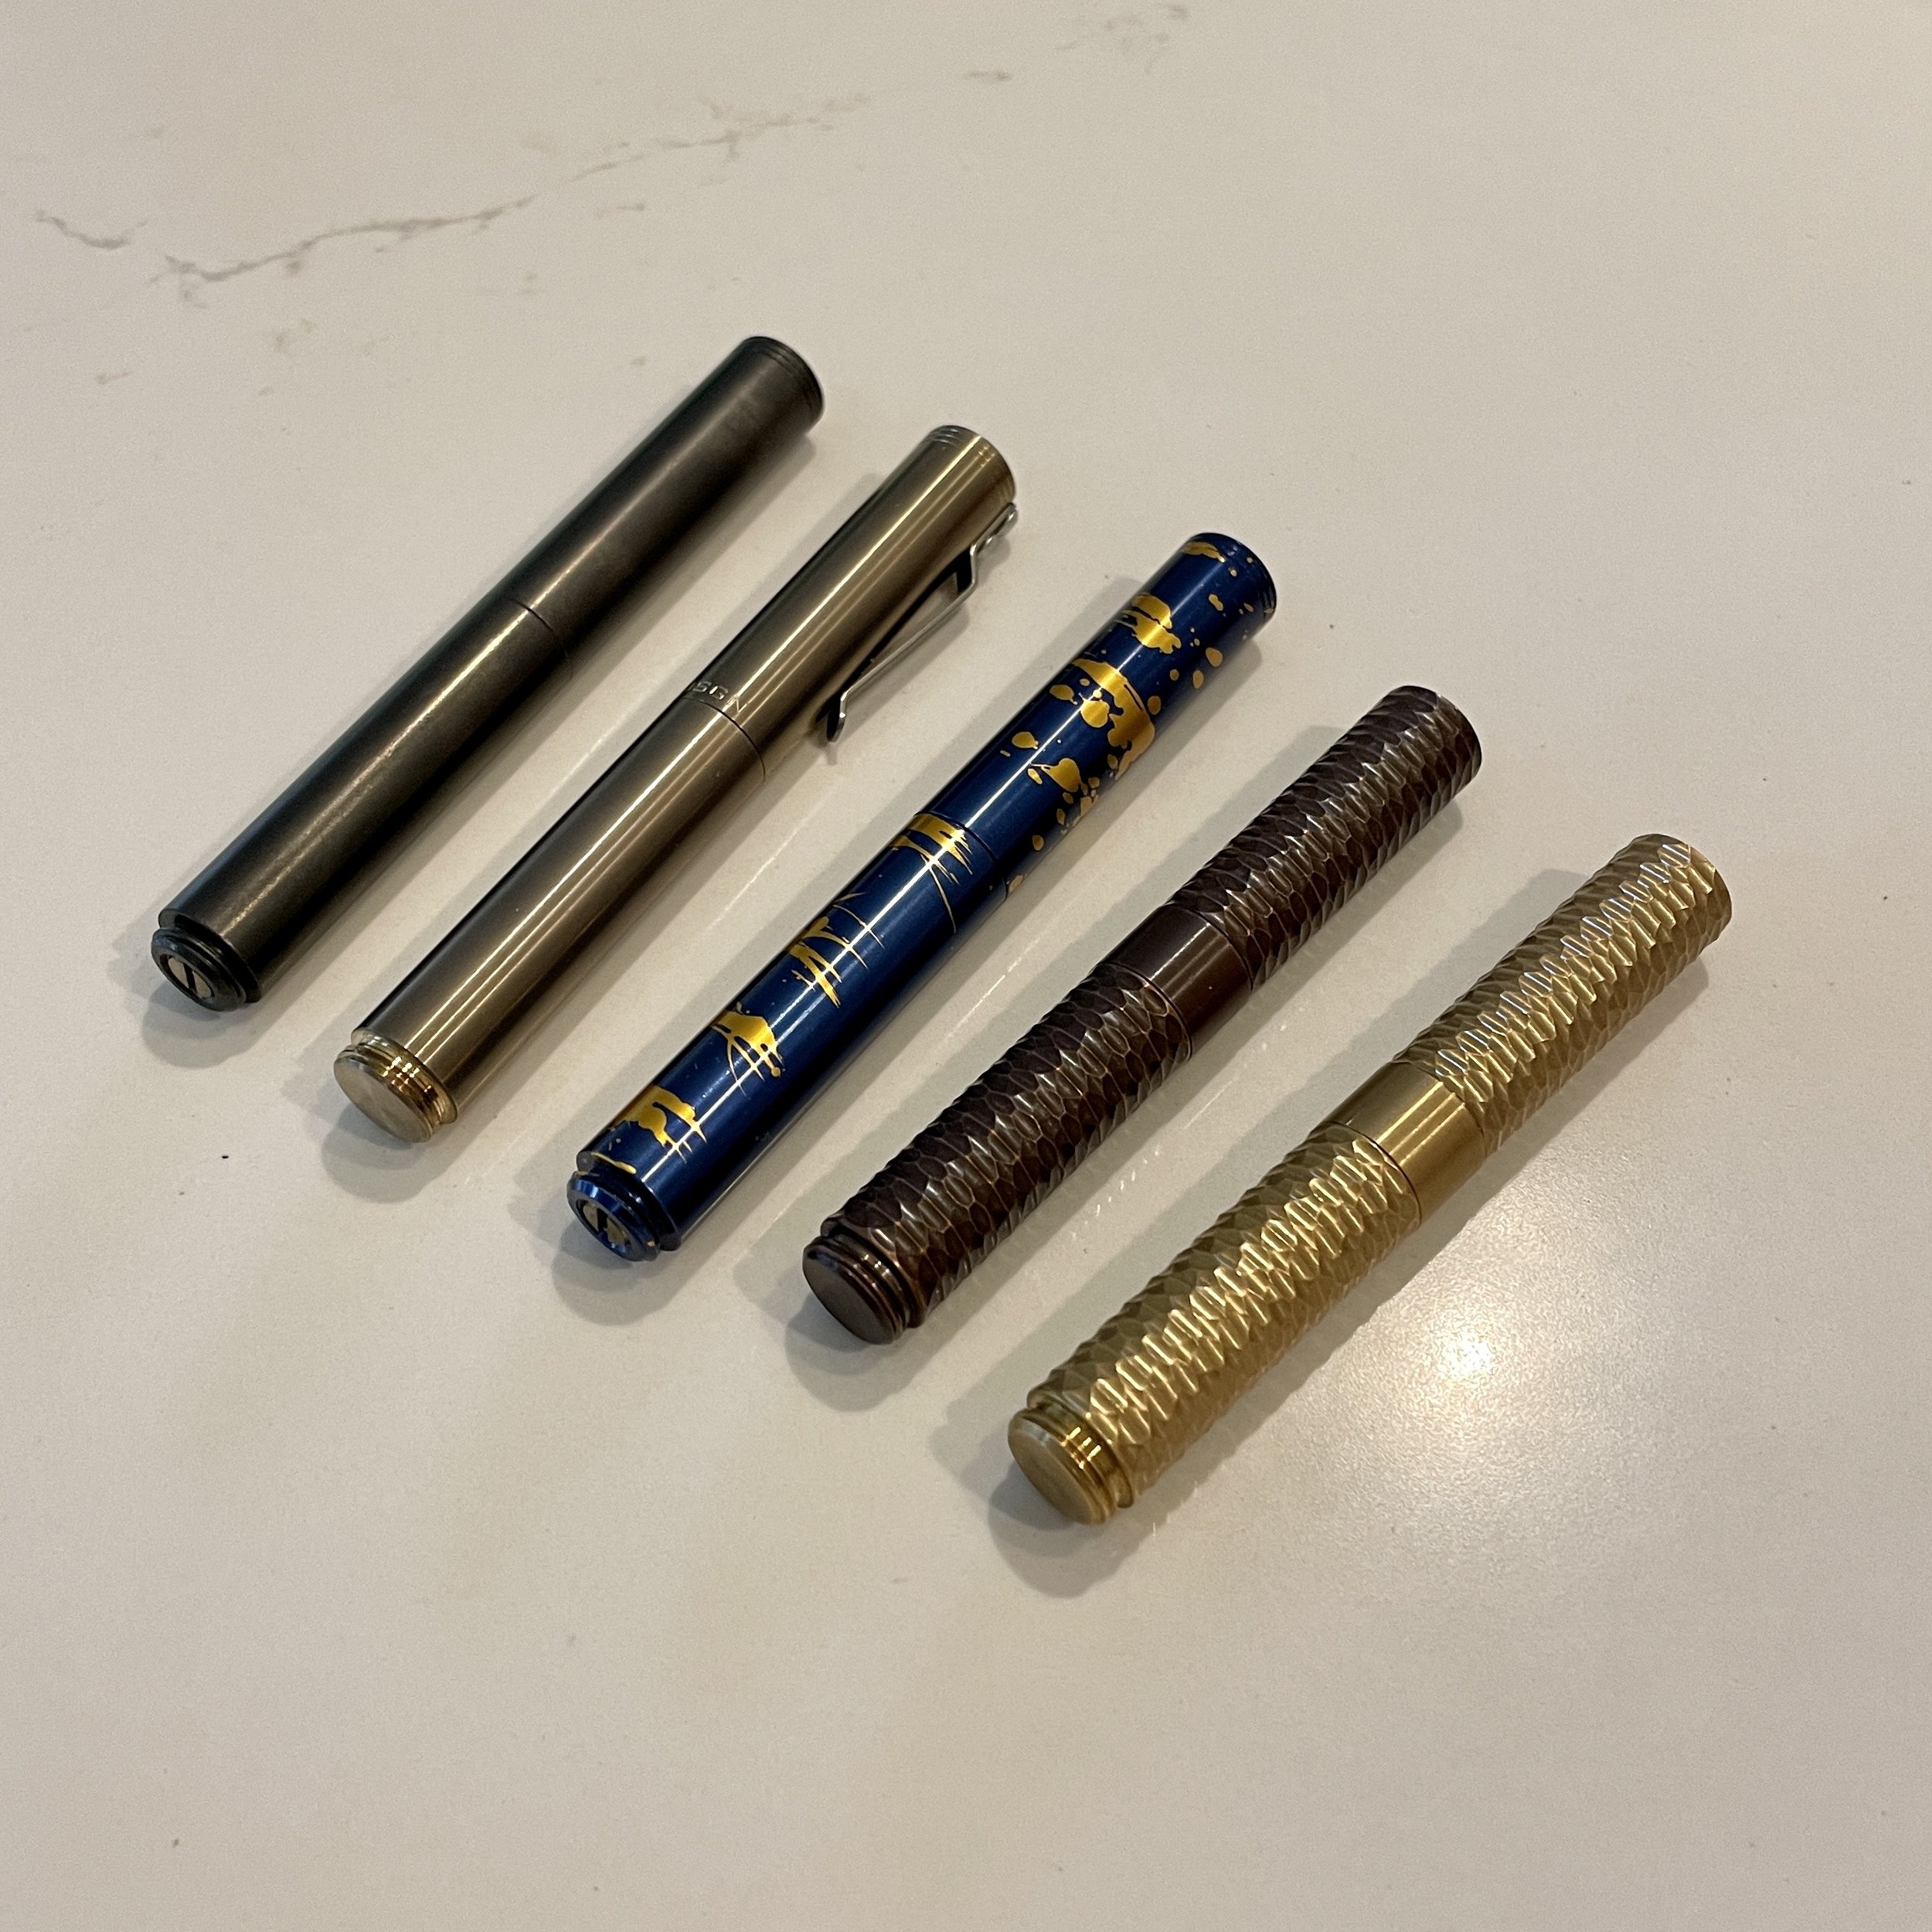 In Pursuit of the Perfect Patina: The Schon DSGN Machined Pen v2